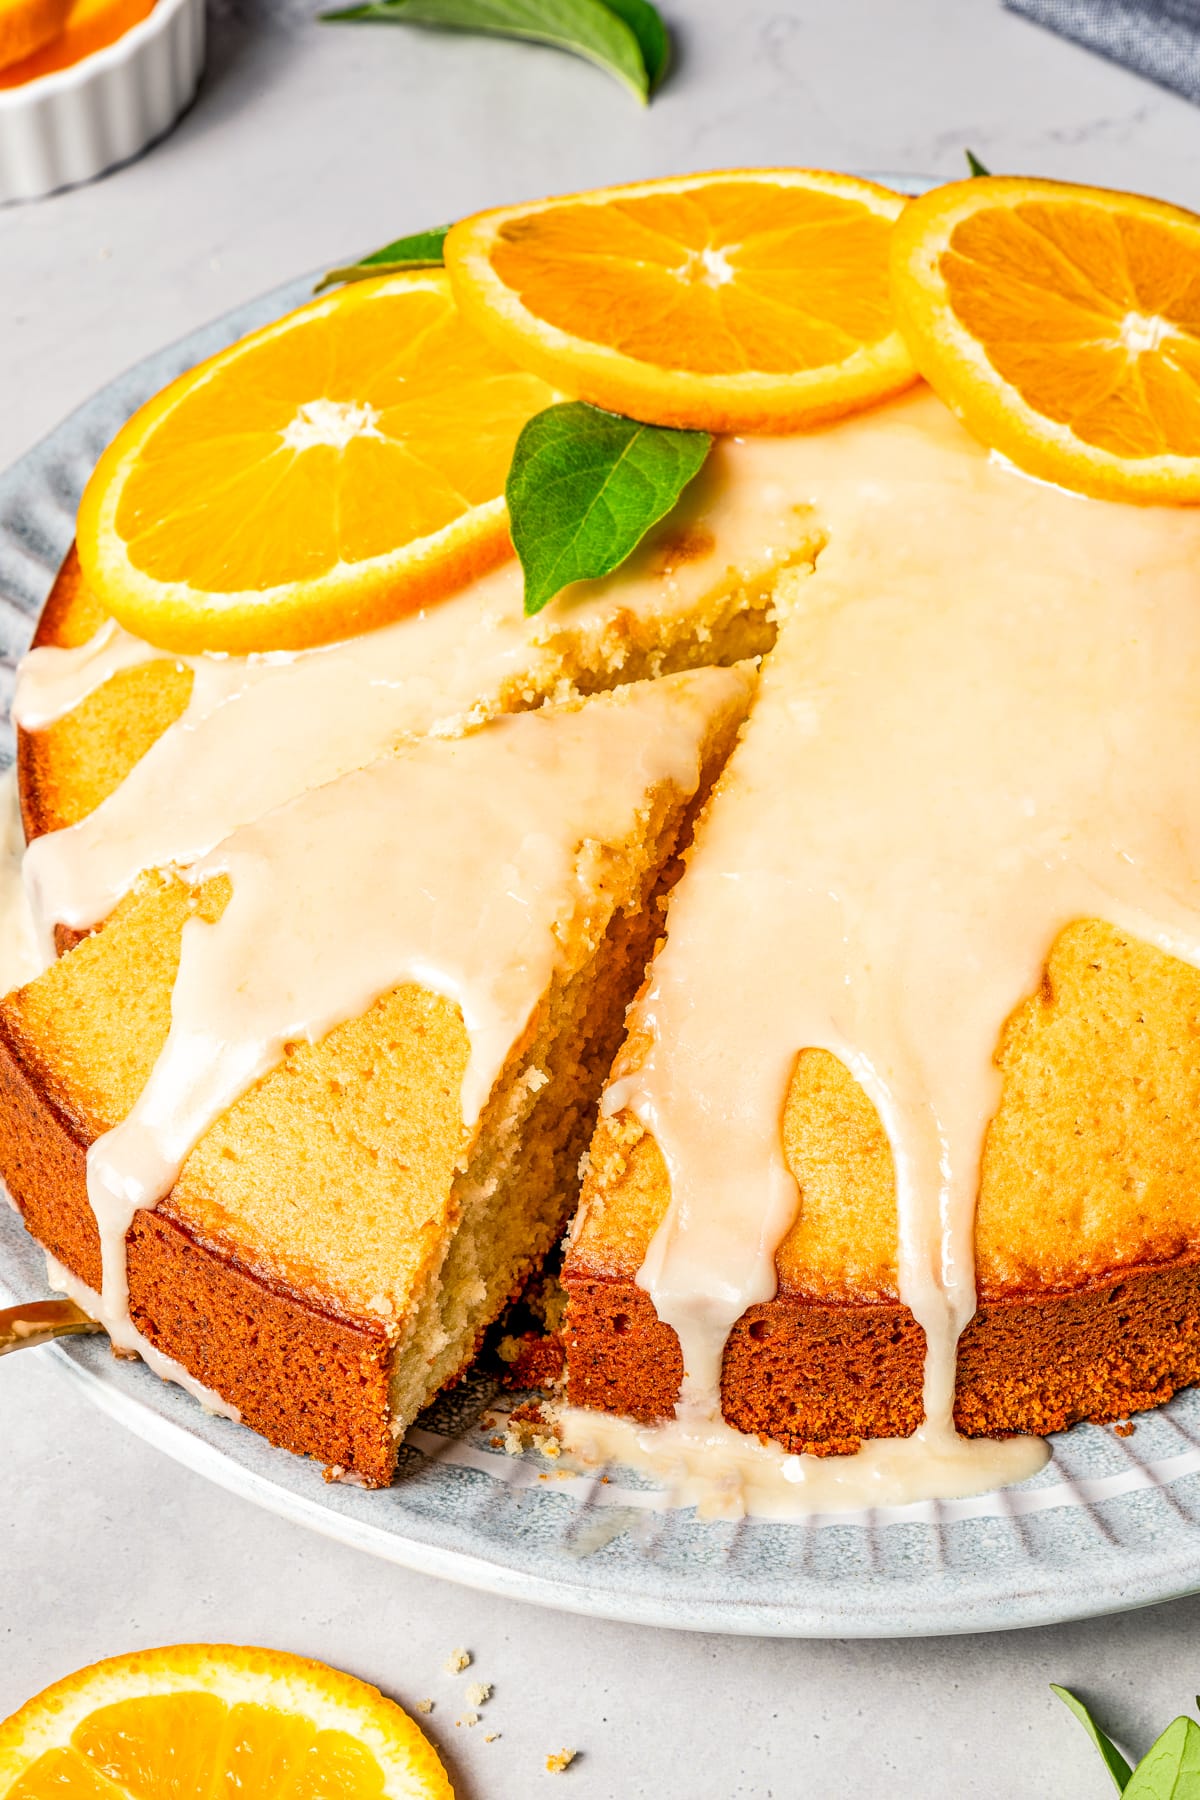 A slice is lifted from a glazed cake garnished with orange slices and mint leaves.